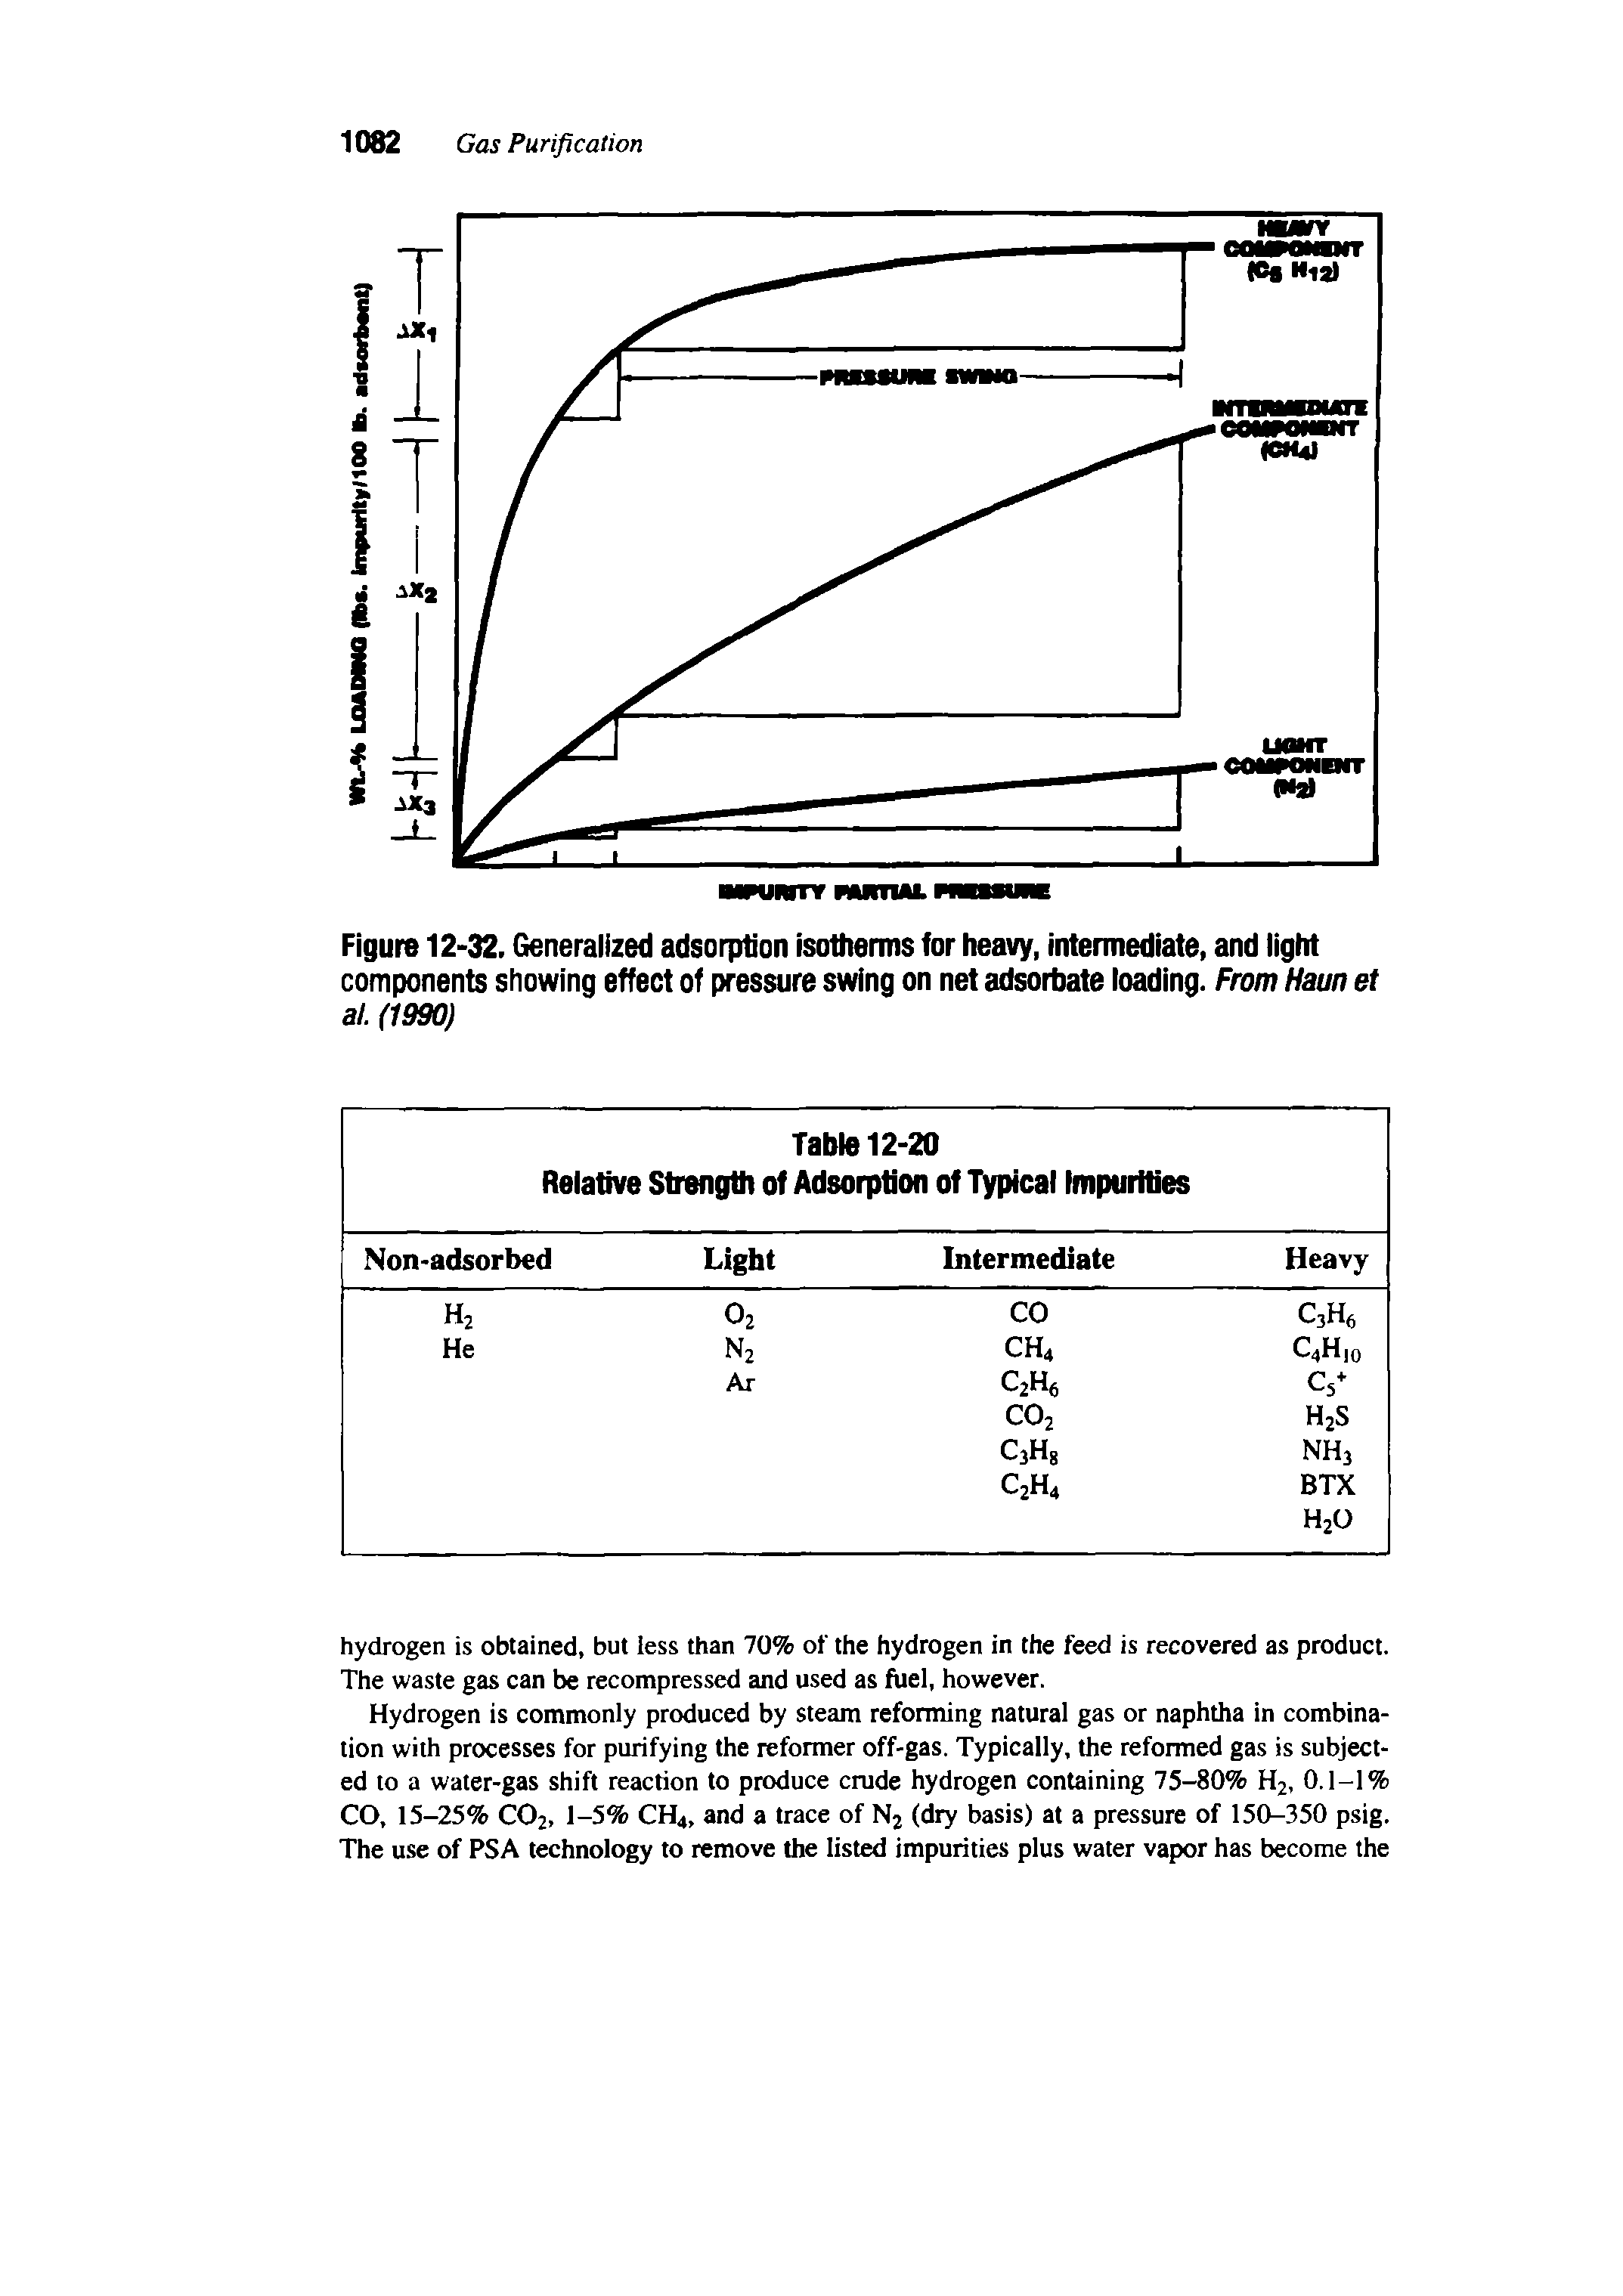 Figure 12-32. Generalized adsorption isotherms for heavy, intermediate, and light components showing effect of pressure swing on net adsorbate loading. From Haun et al. (1990)...